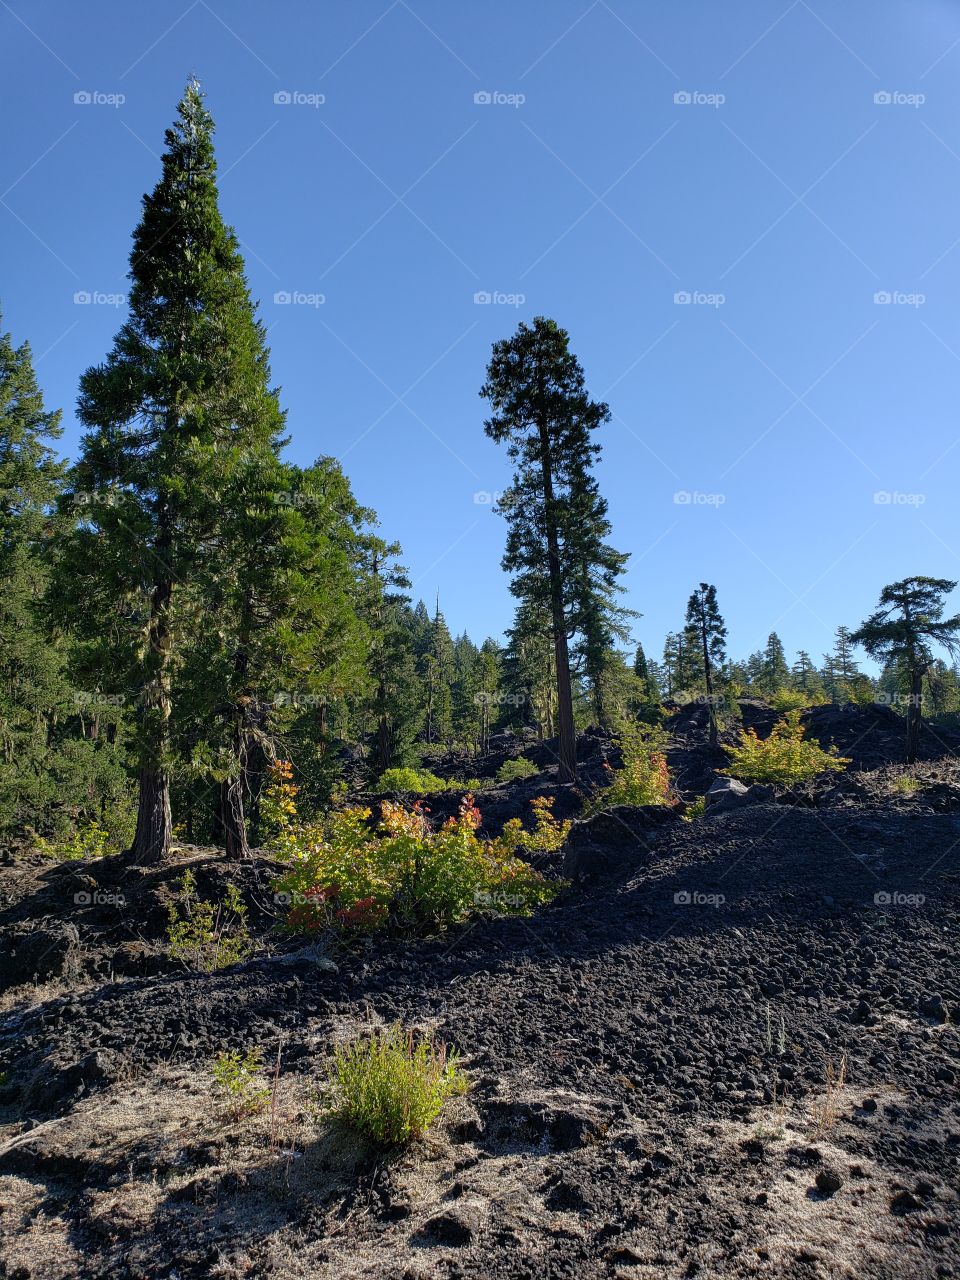 Hardened lava rock covers the forest floor among the fir trees and bushes on a sunny summer morning in Western Oregon. 